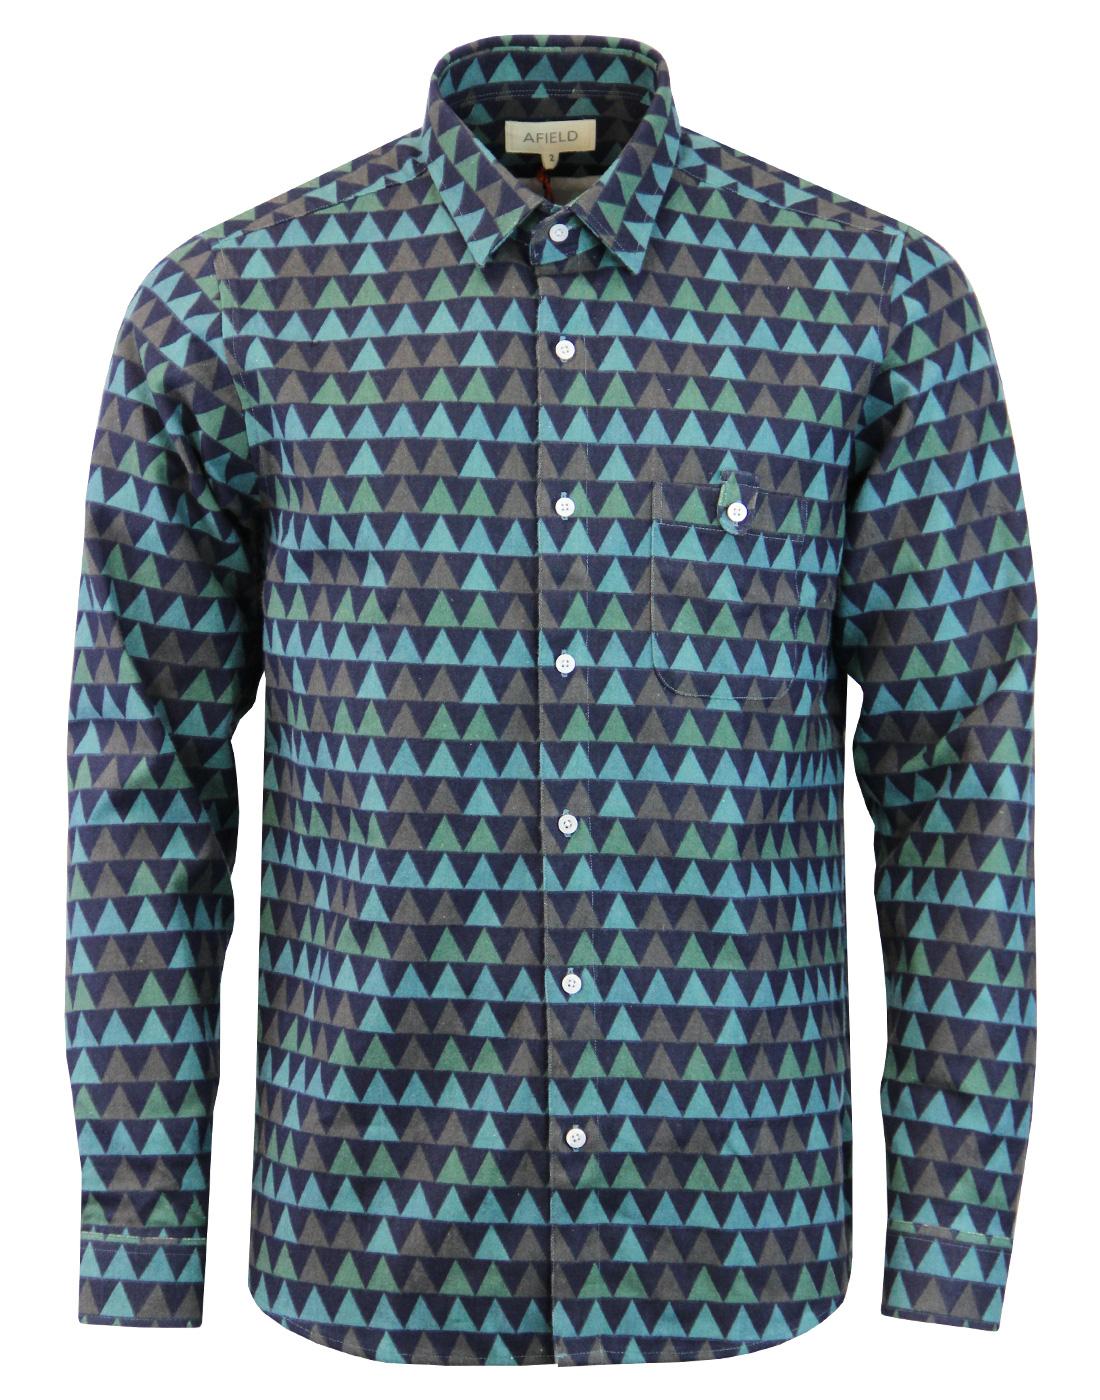 Tab AFIELD Op Art 70s Mountains Flannel Overshirt